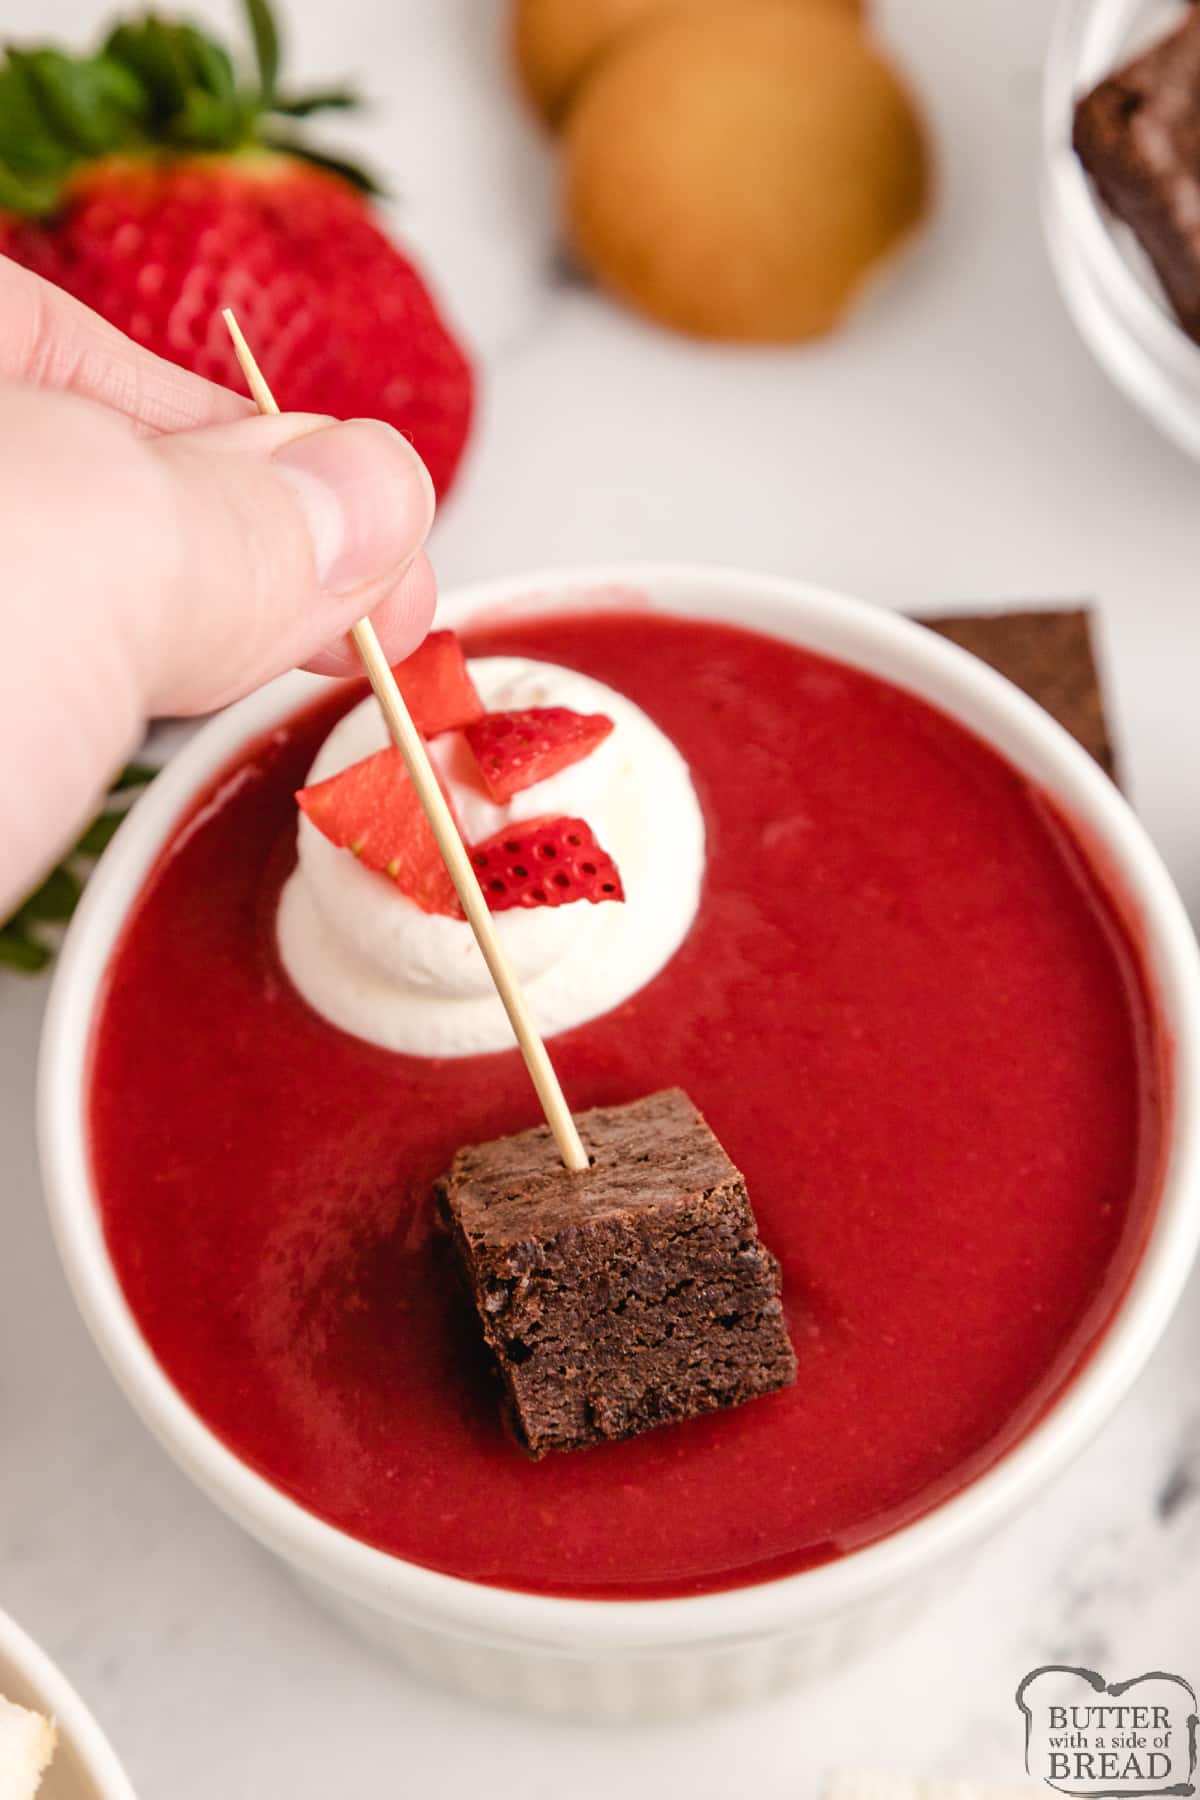 Easy strawberry dipping sauce recipe